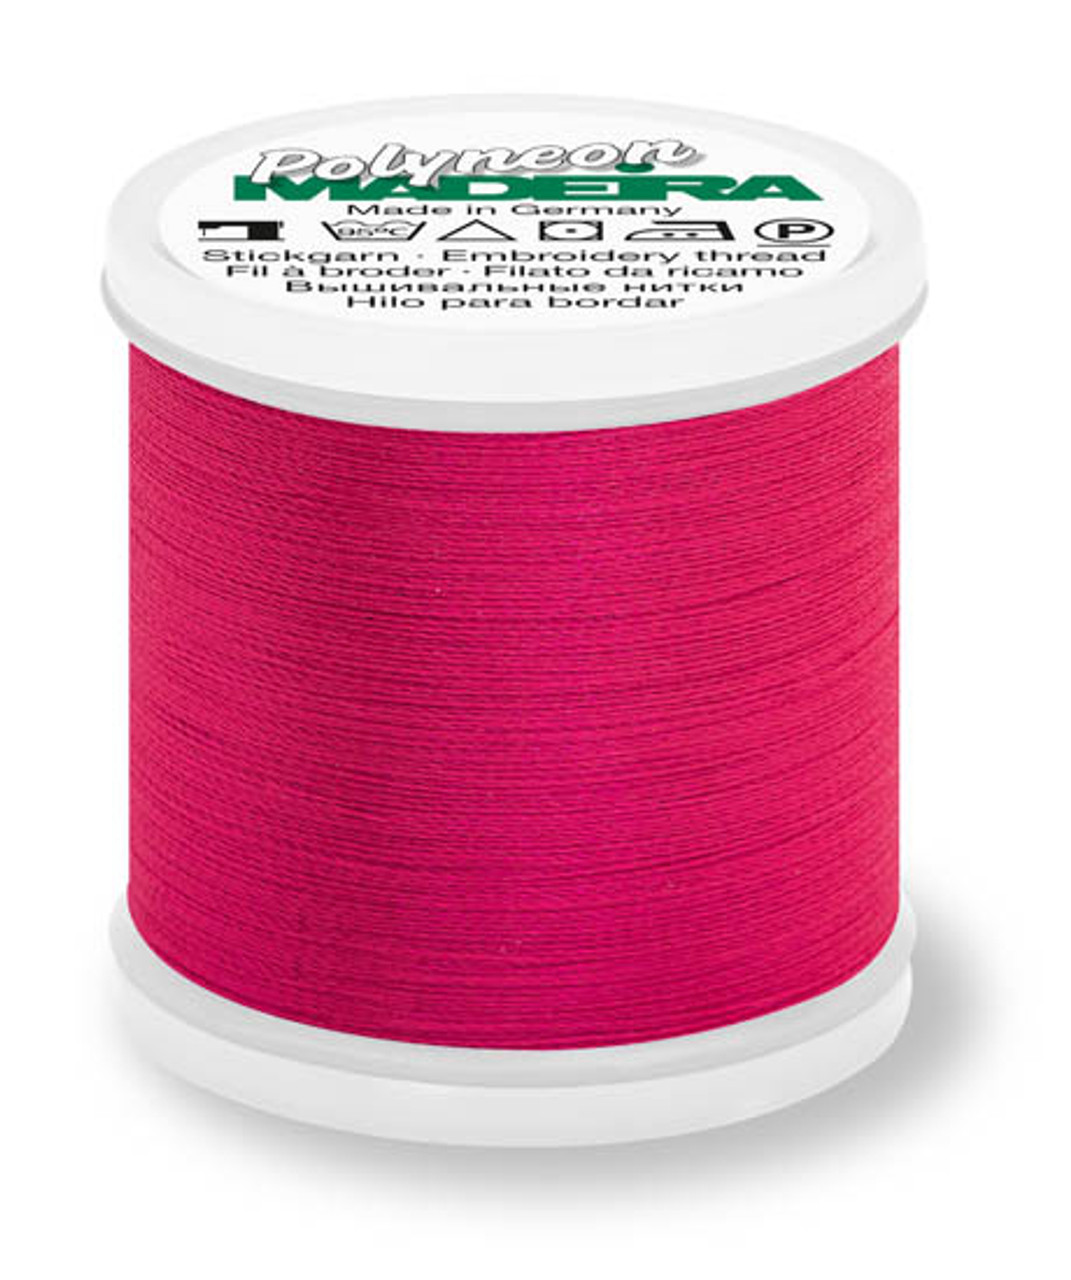 Machine Embroidery Thread - Large - 5000 Meters Sweet Pink —